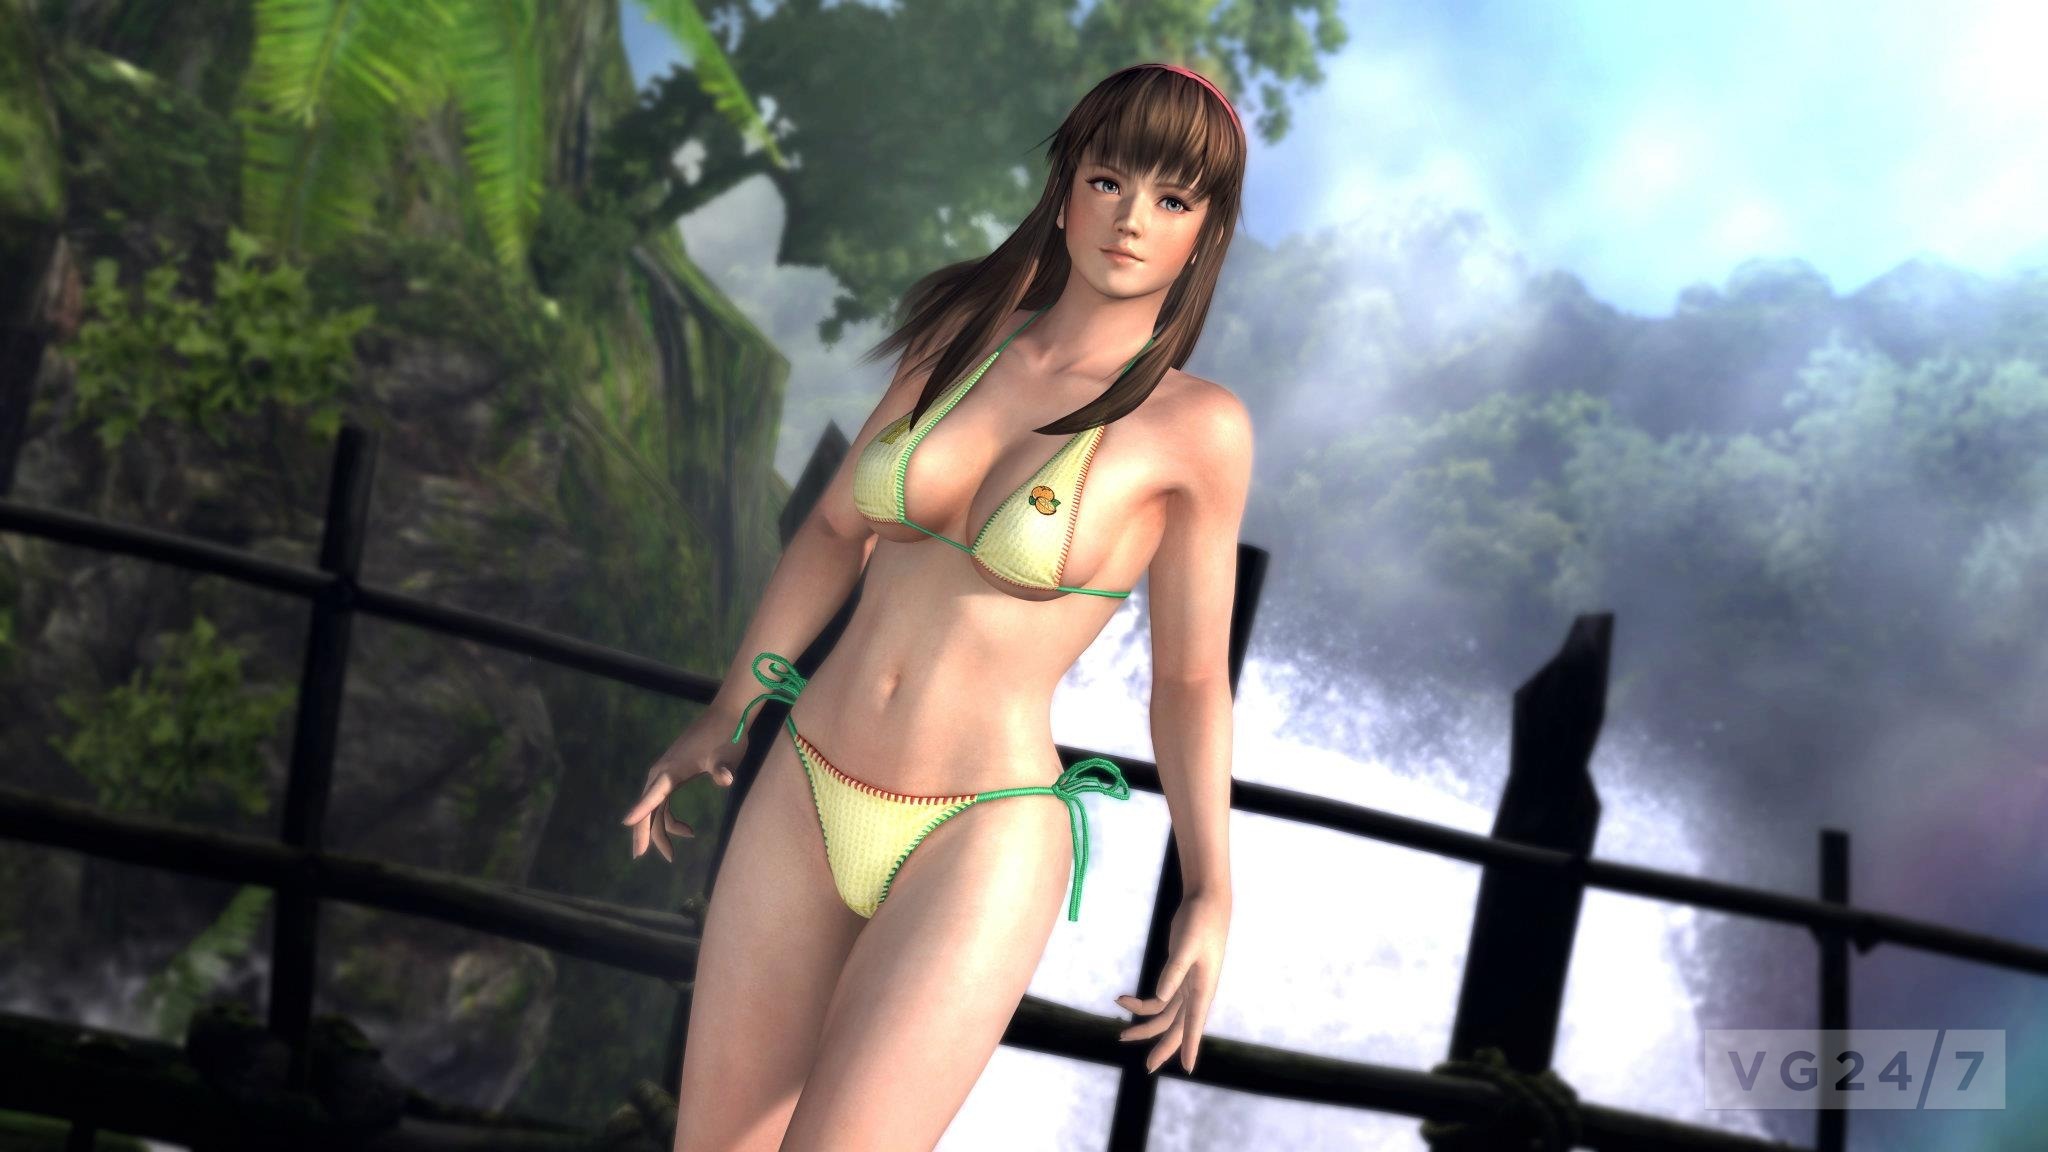 21 of The Hottest Female Game Character